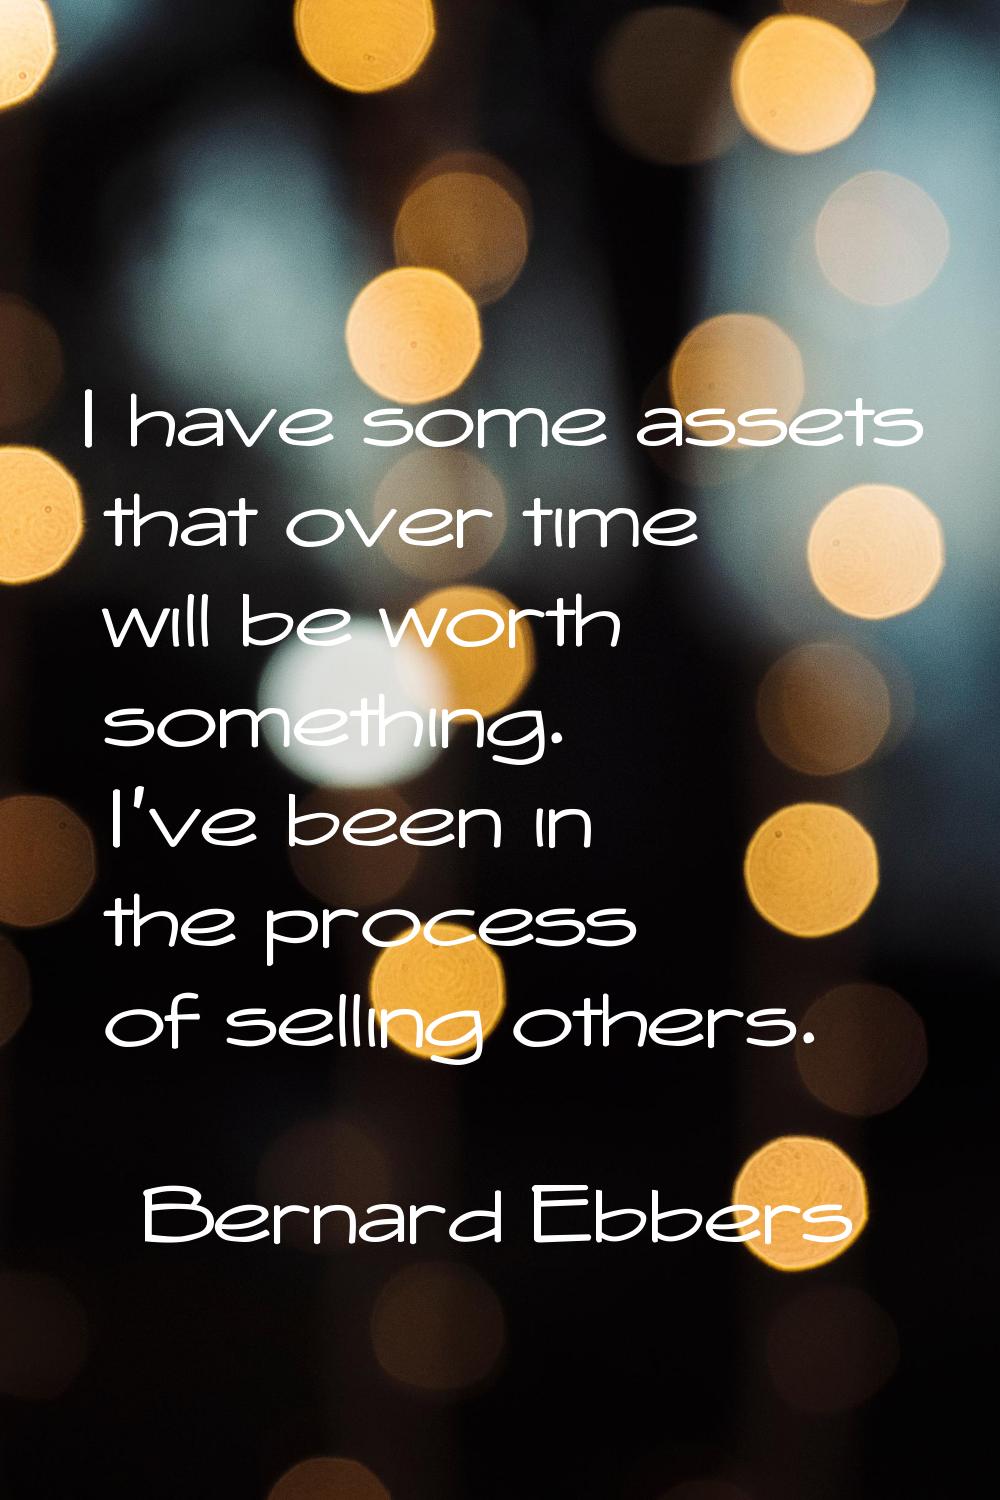 I have some assets that over time will be worth something. I've been in the process of selling othe